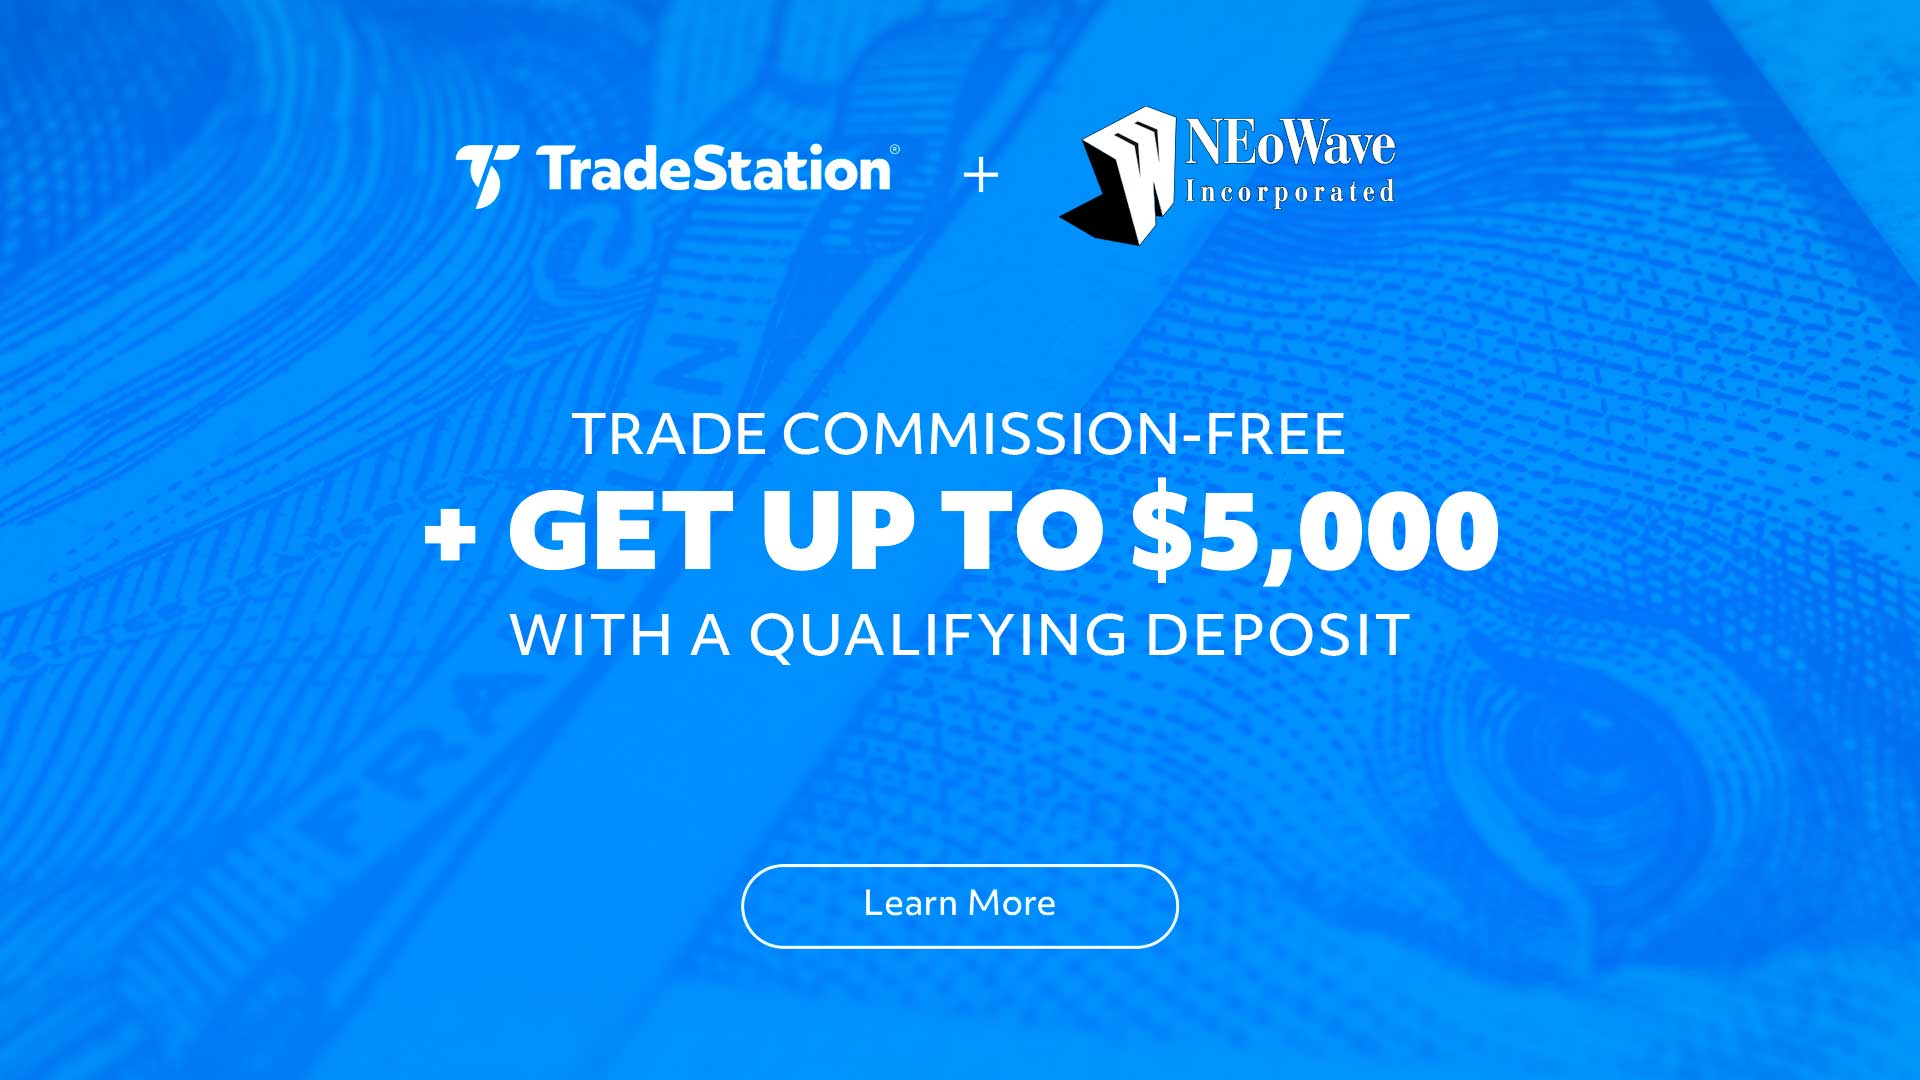 Get Up To $5,000 when you transfer funds into your Tradestation account